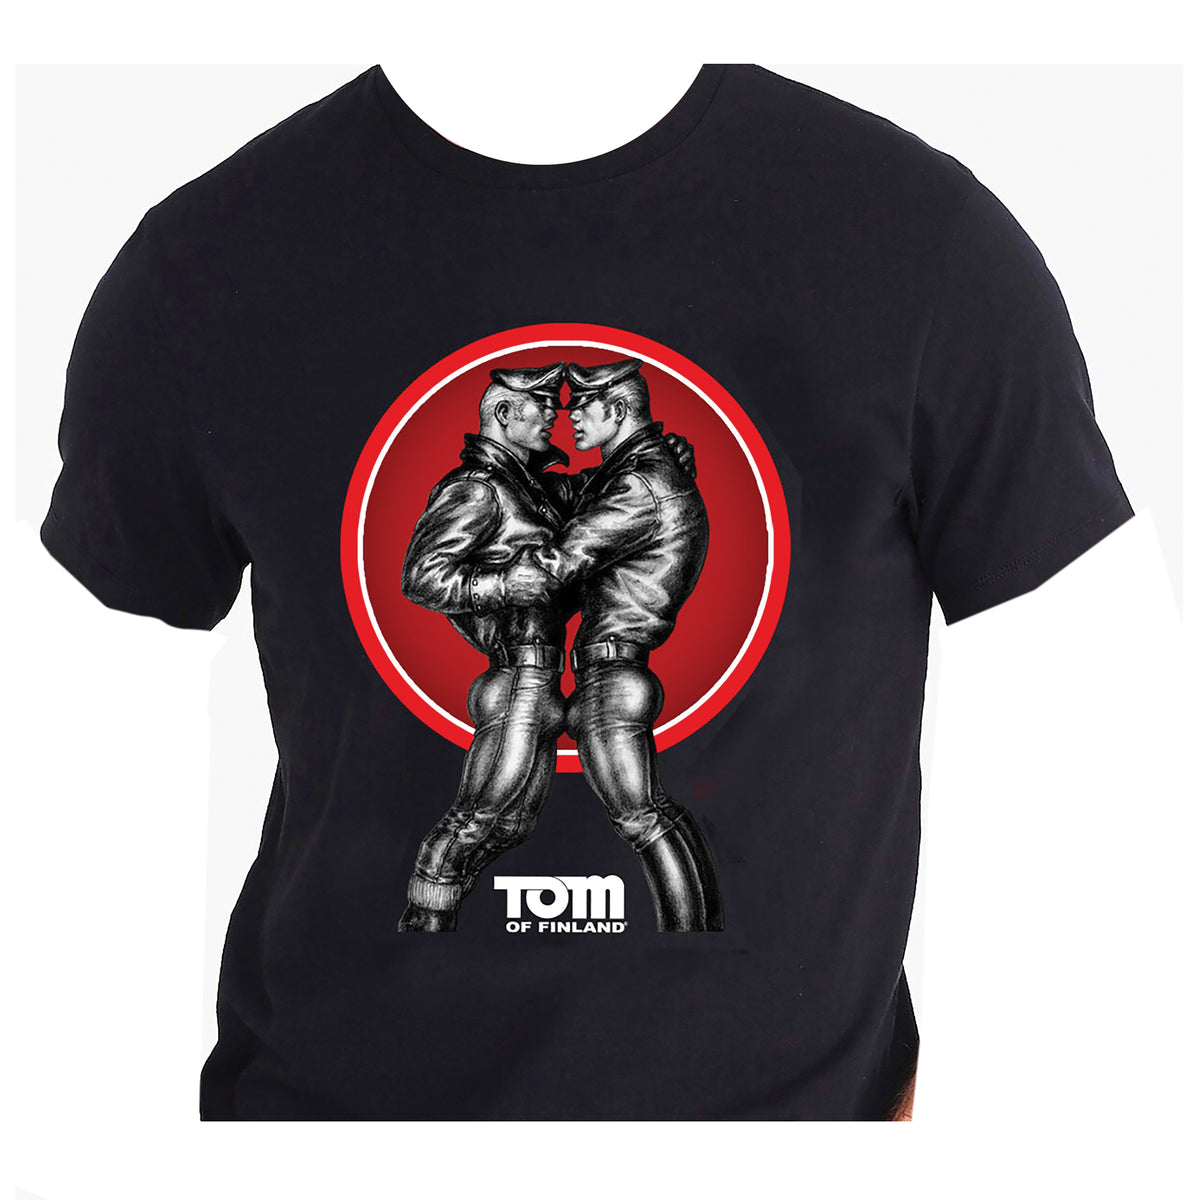 Tom of Finland Leather Man Tee (Black)